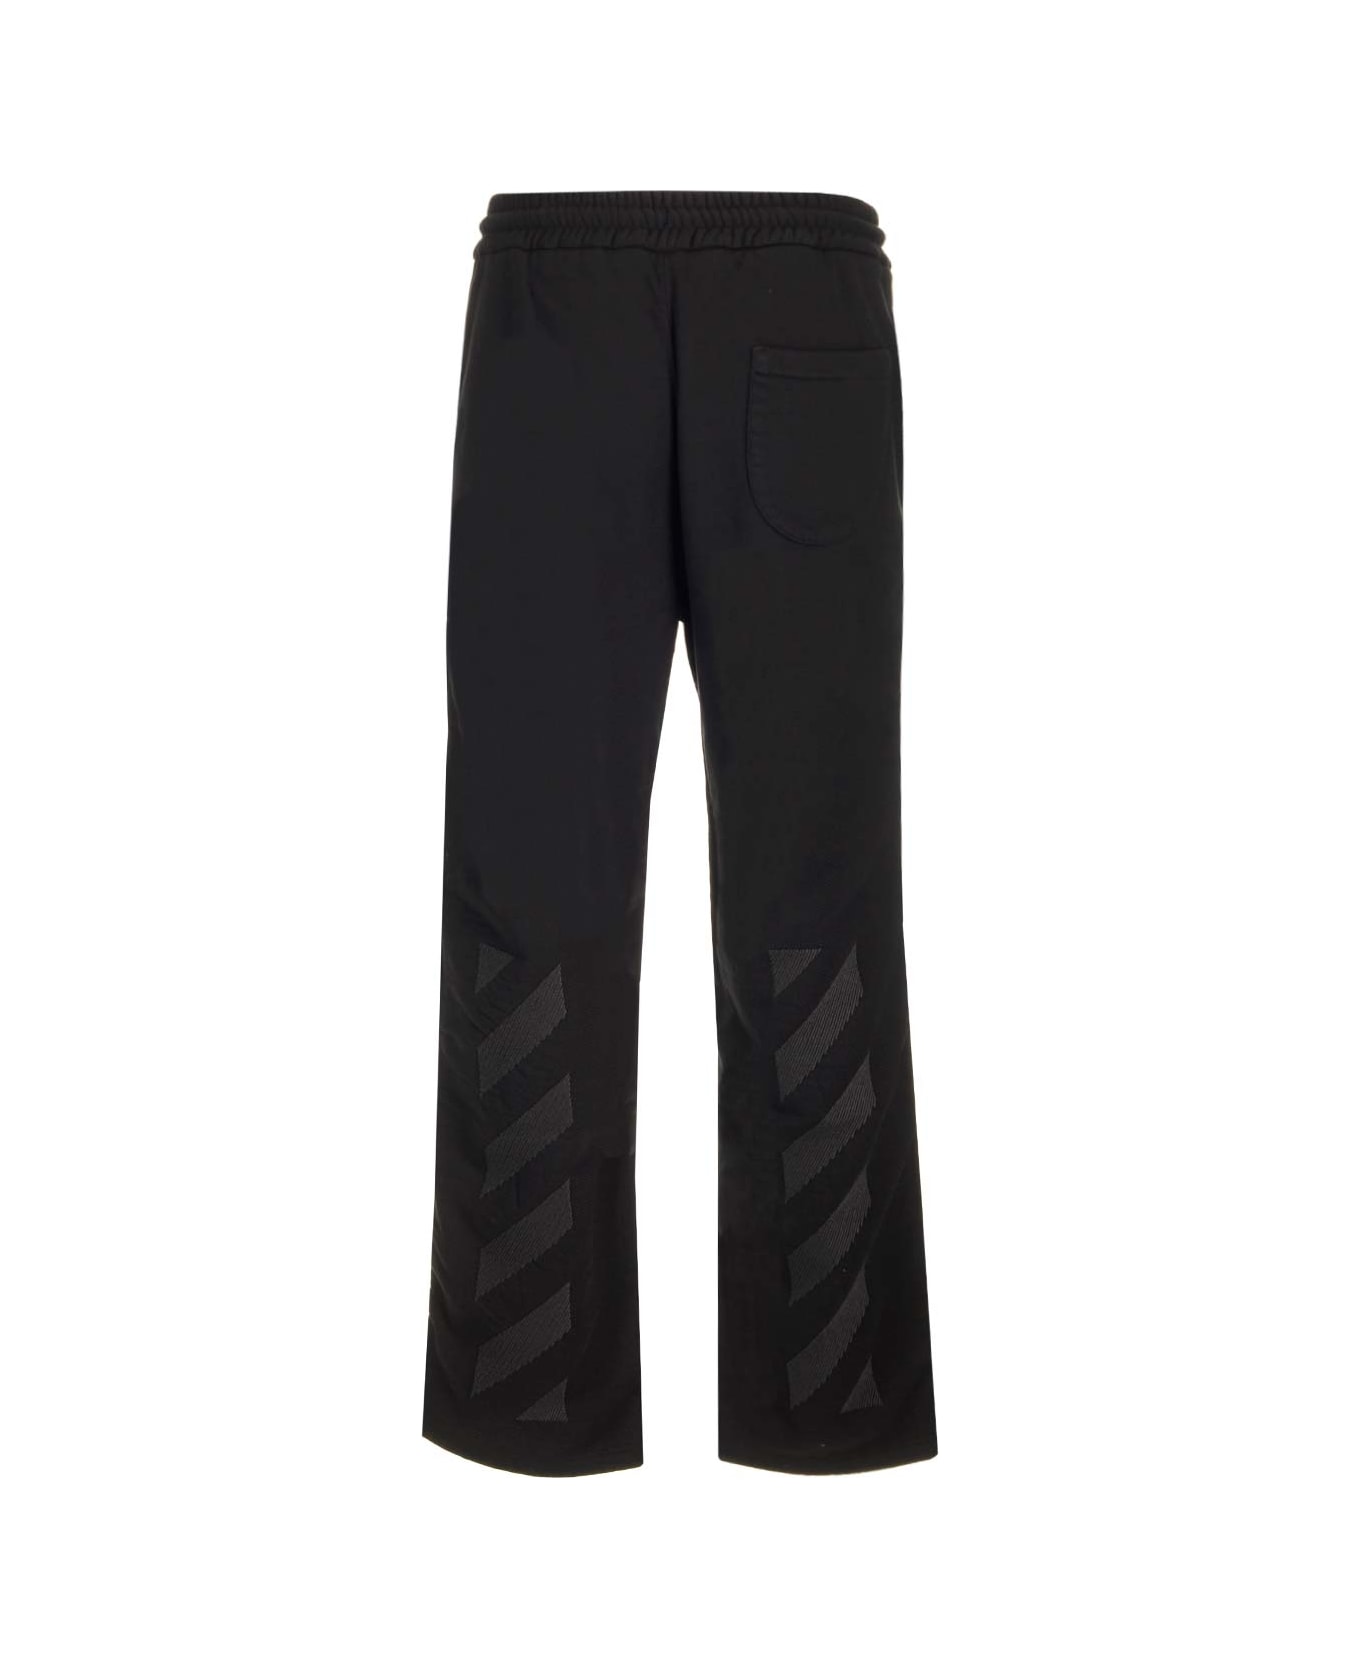 Off-White Cornely Diags Tracksuit Pants - Black ボトムス